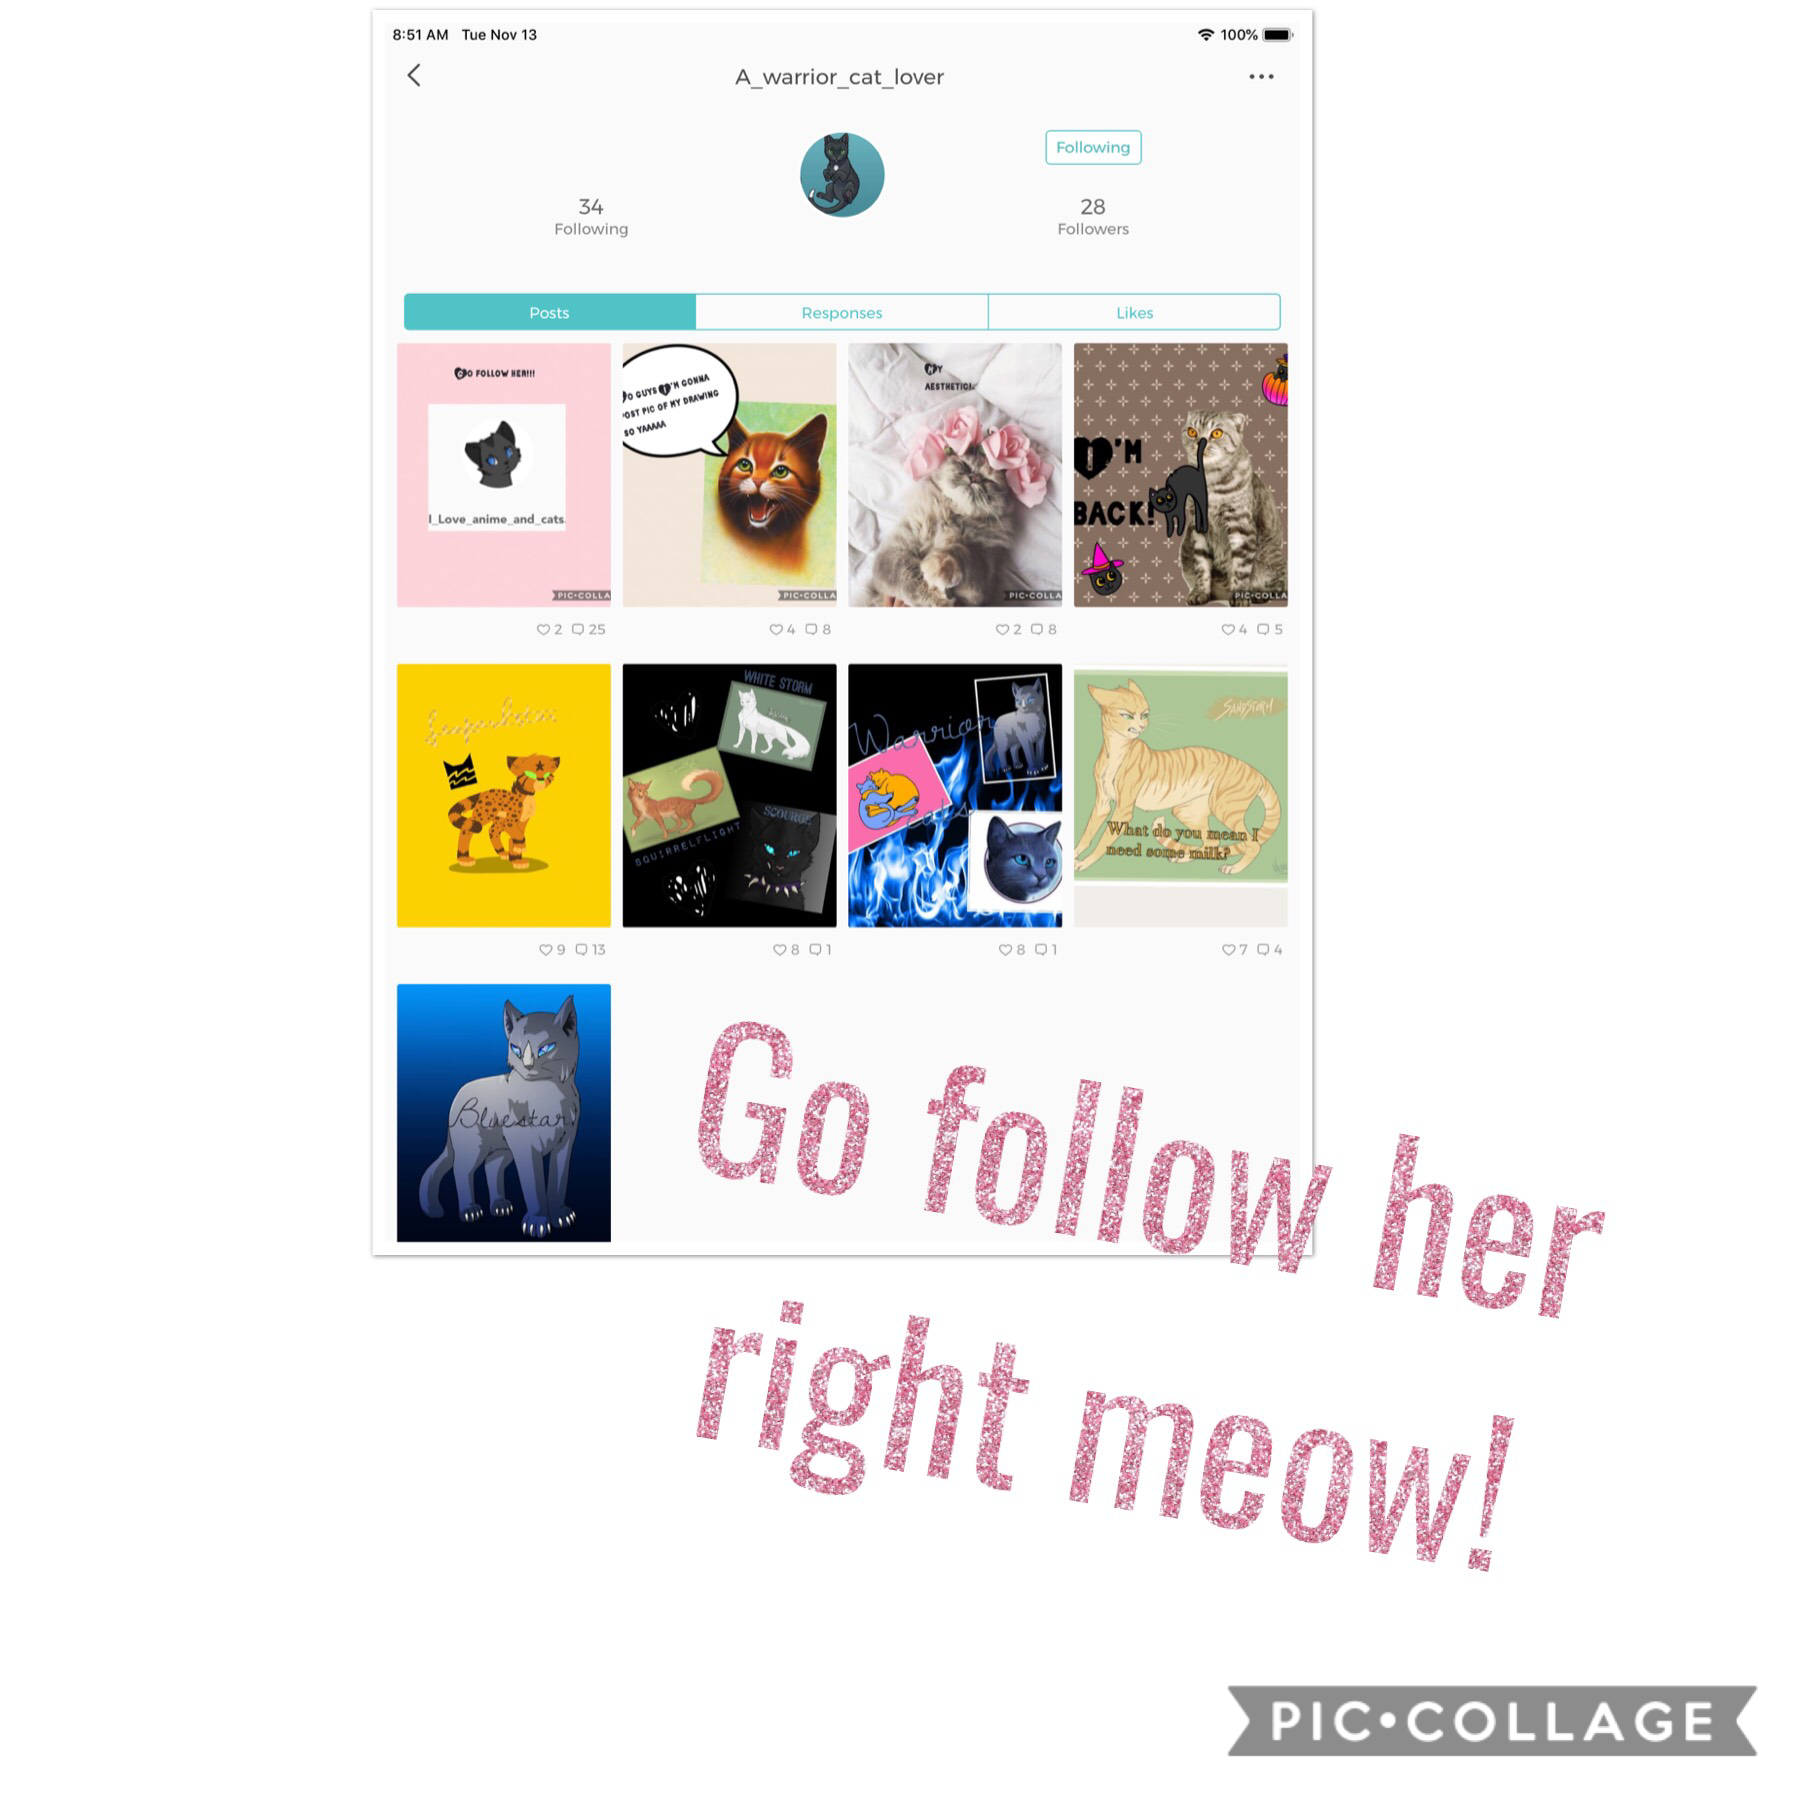 Follow her right meow!